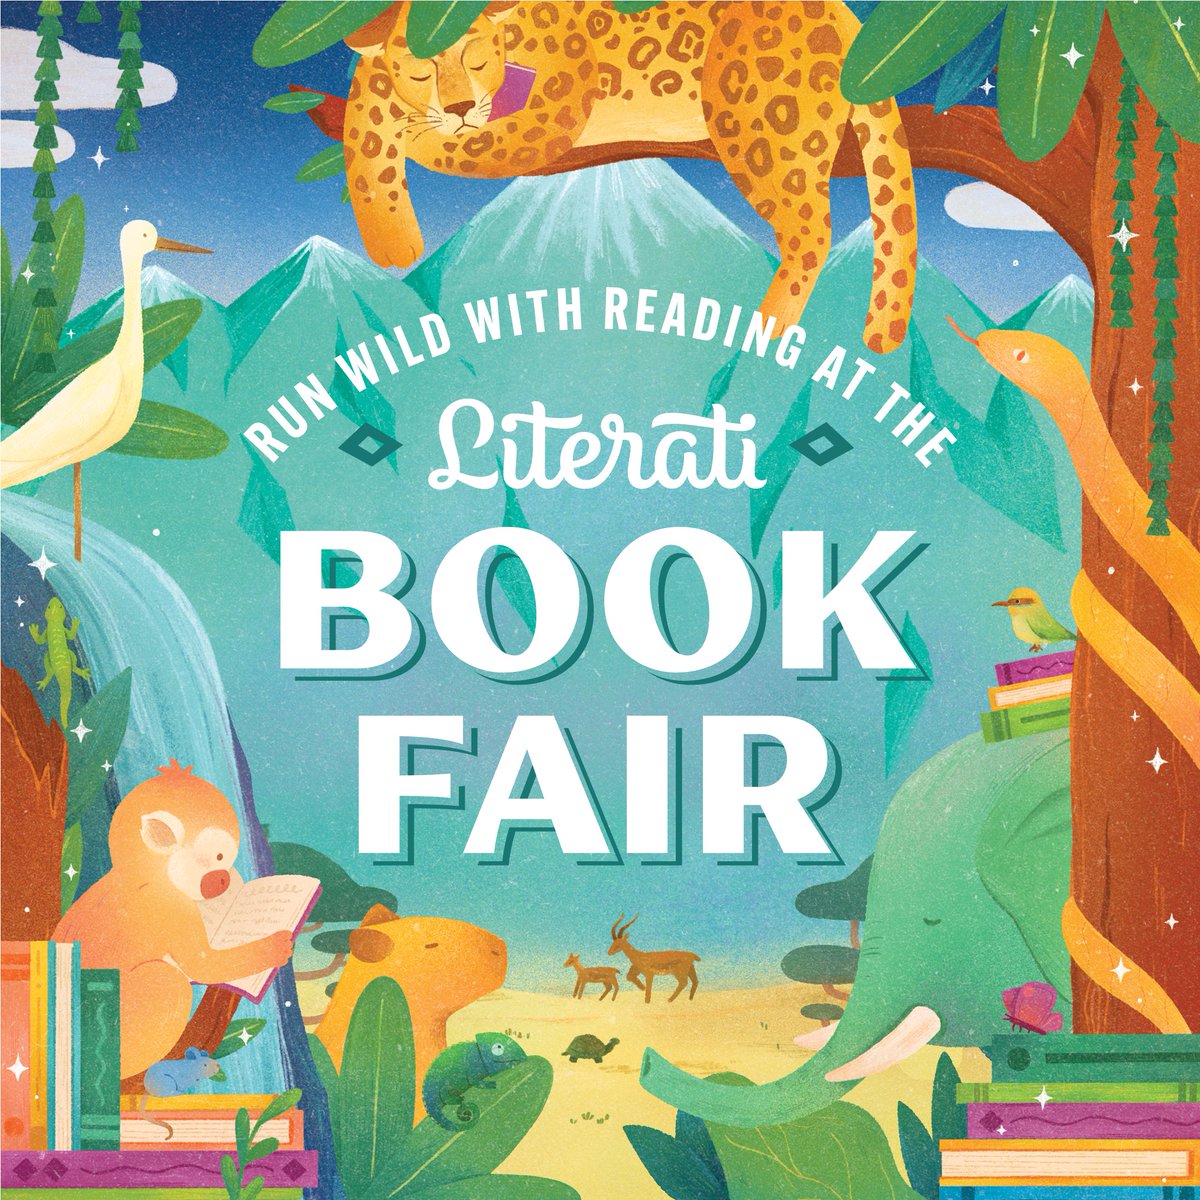 The Literati Book Fair (8 am-2 pm, Friday 8 am-11 am) is next week! Purchase gift cards for your student to make seamless purchases during their class visit (see Thursday papers). We also have parent shopping hours during carpool on Wednesday and Thursday 7:10 to 8 am. @OceeElem